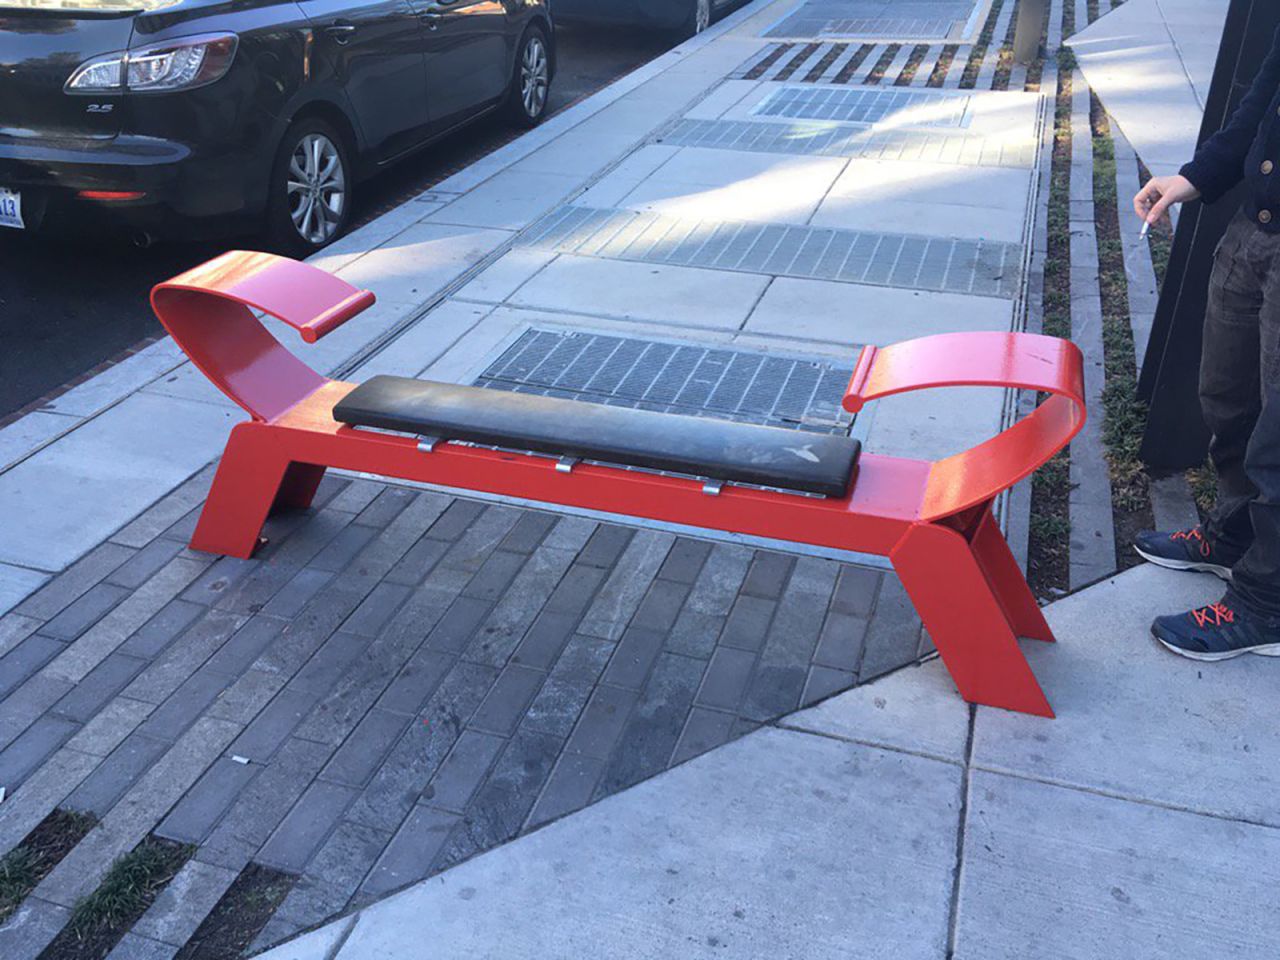 The armrests on this bench also prevent people from sleeping on it.